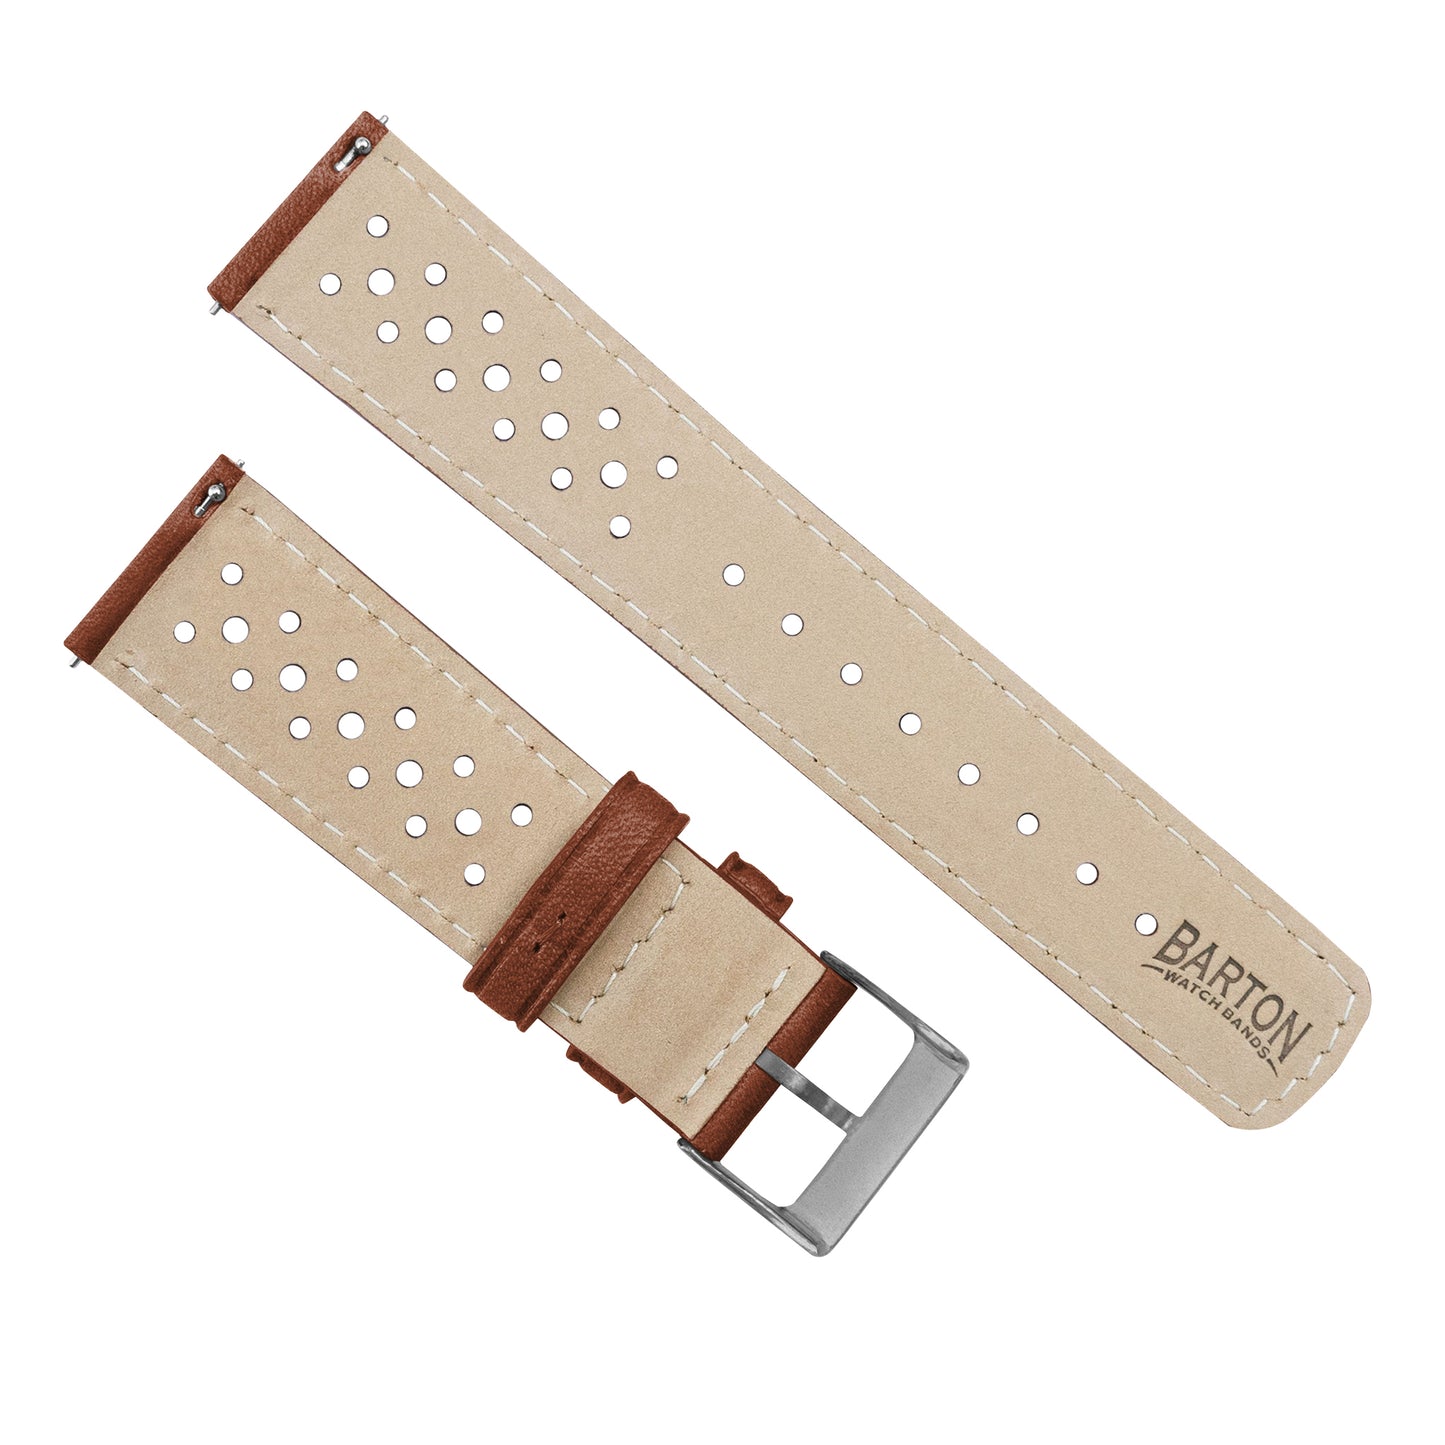 Huwawei Watch Racing Horween Leather Chocolate Brown Linen Stitch Watch Band